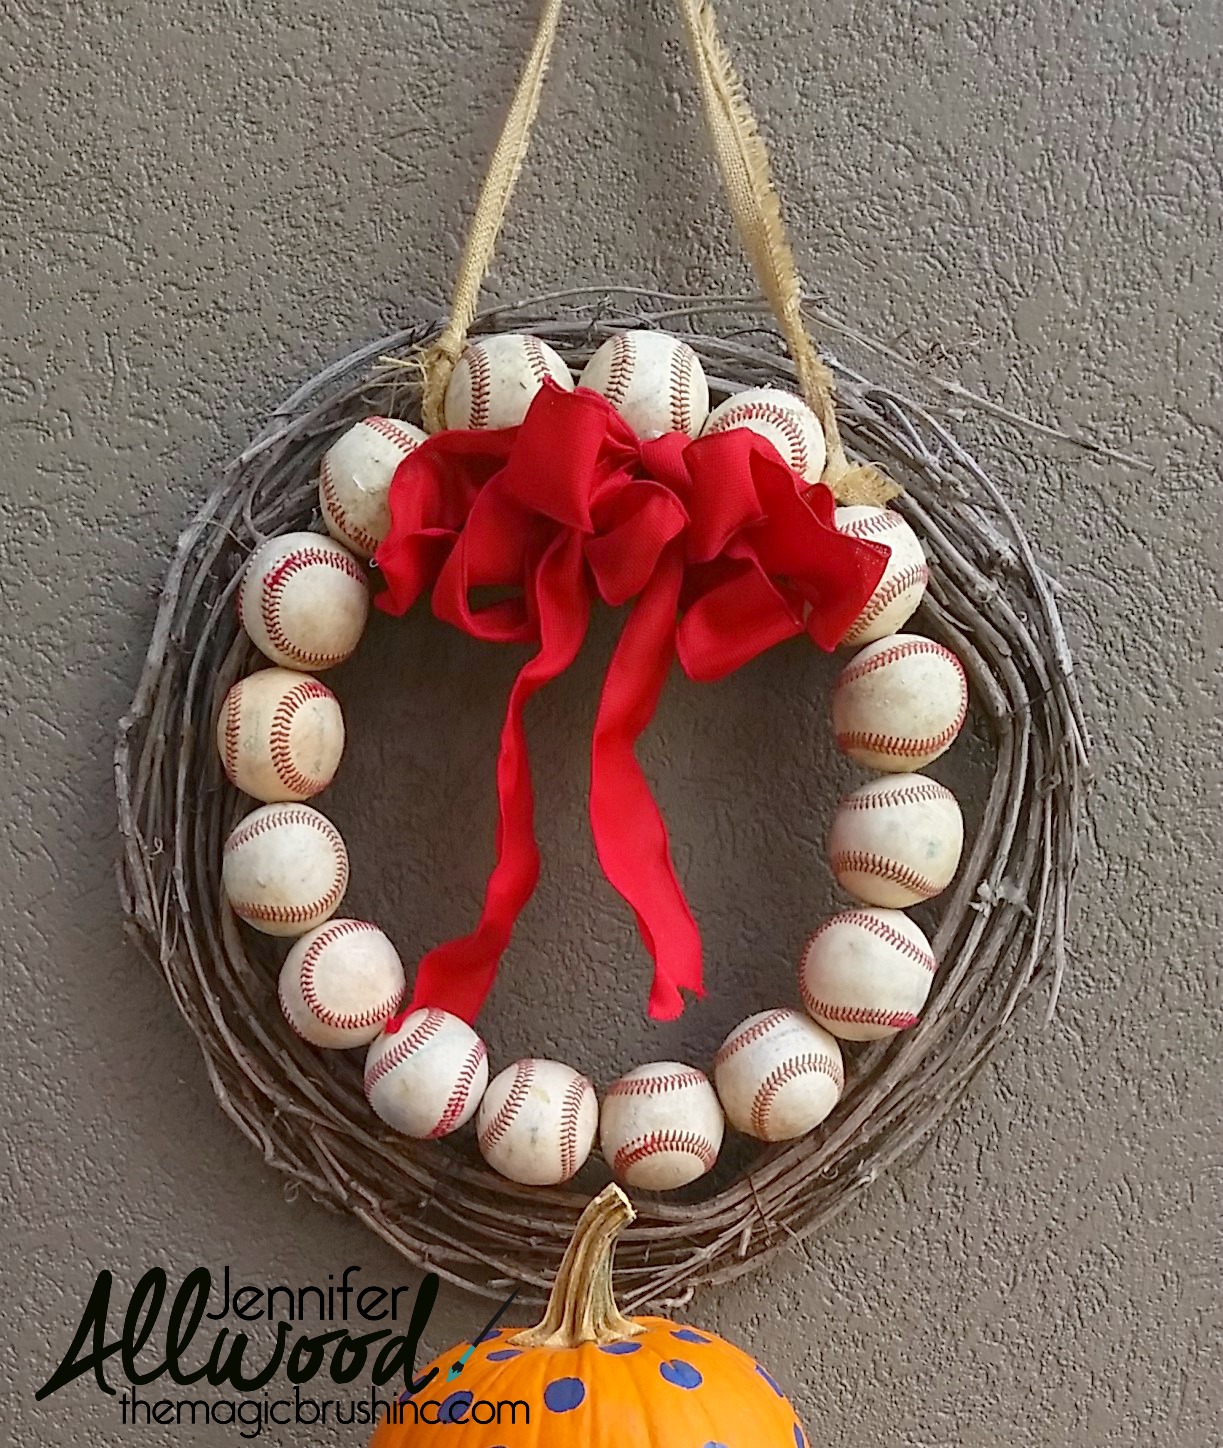 How to make a baseball wreath for your front door